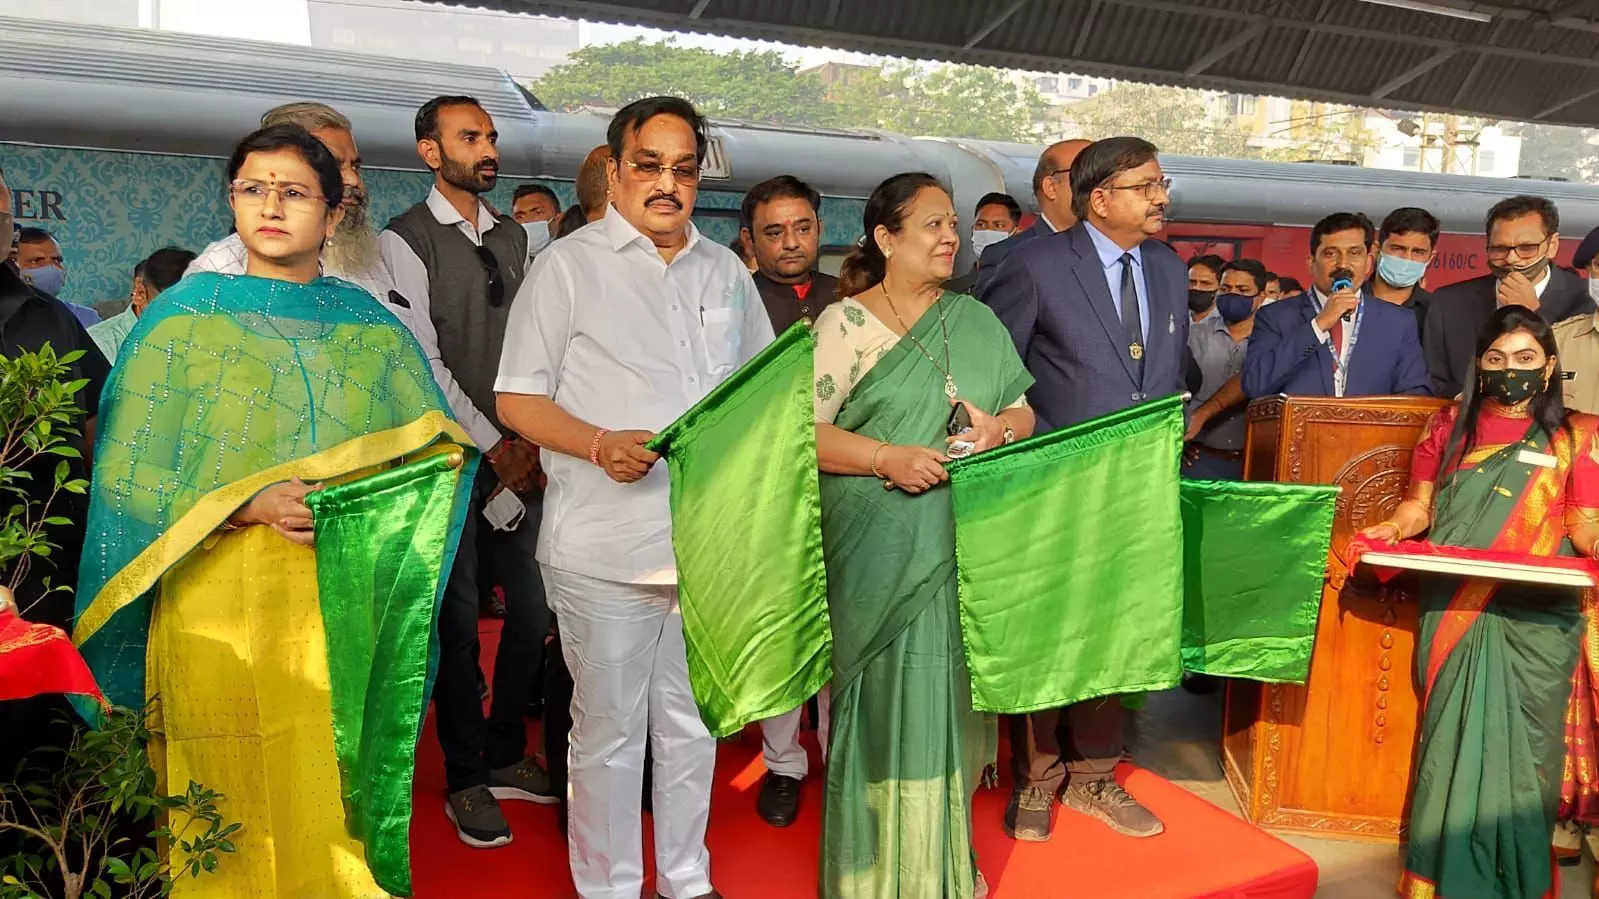 Minister of state for railways flagged off the maiden extended trip of Shatabdi express at Surat station